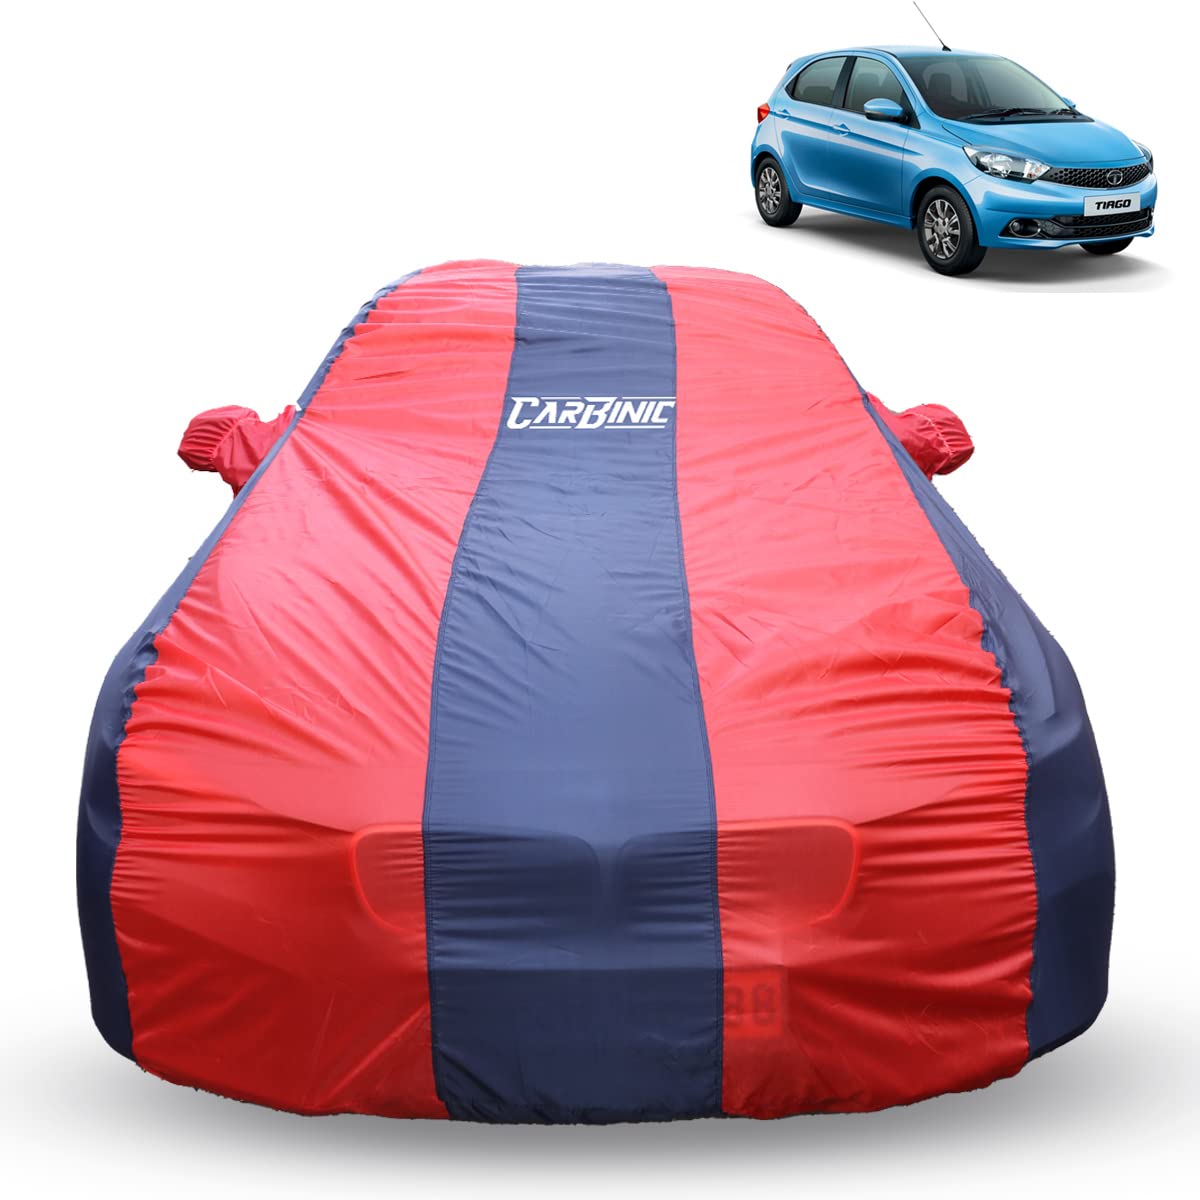 CarBinic Car Cover for Tata Tiago 2021 Water Resistant (Tested)& Dustproof Custom Fit UV Heat Resistant Outdoor Protection with Triple Stitched Fully Elastic Surface | Blue & Red with Pockets